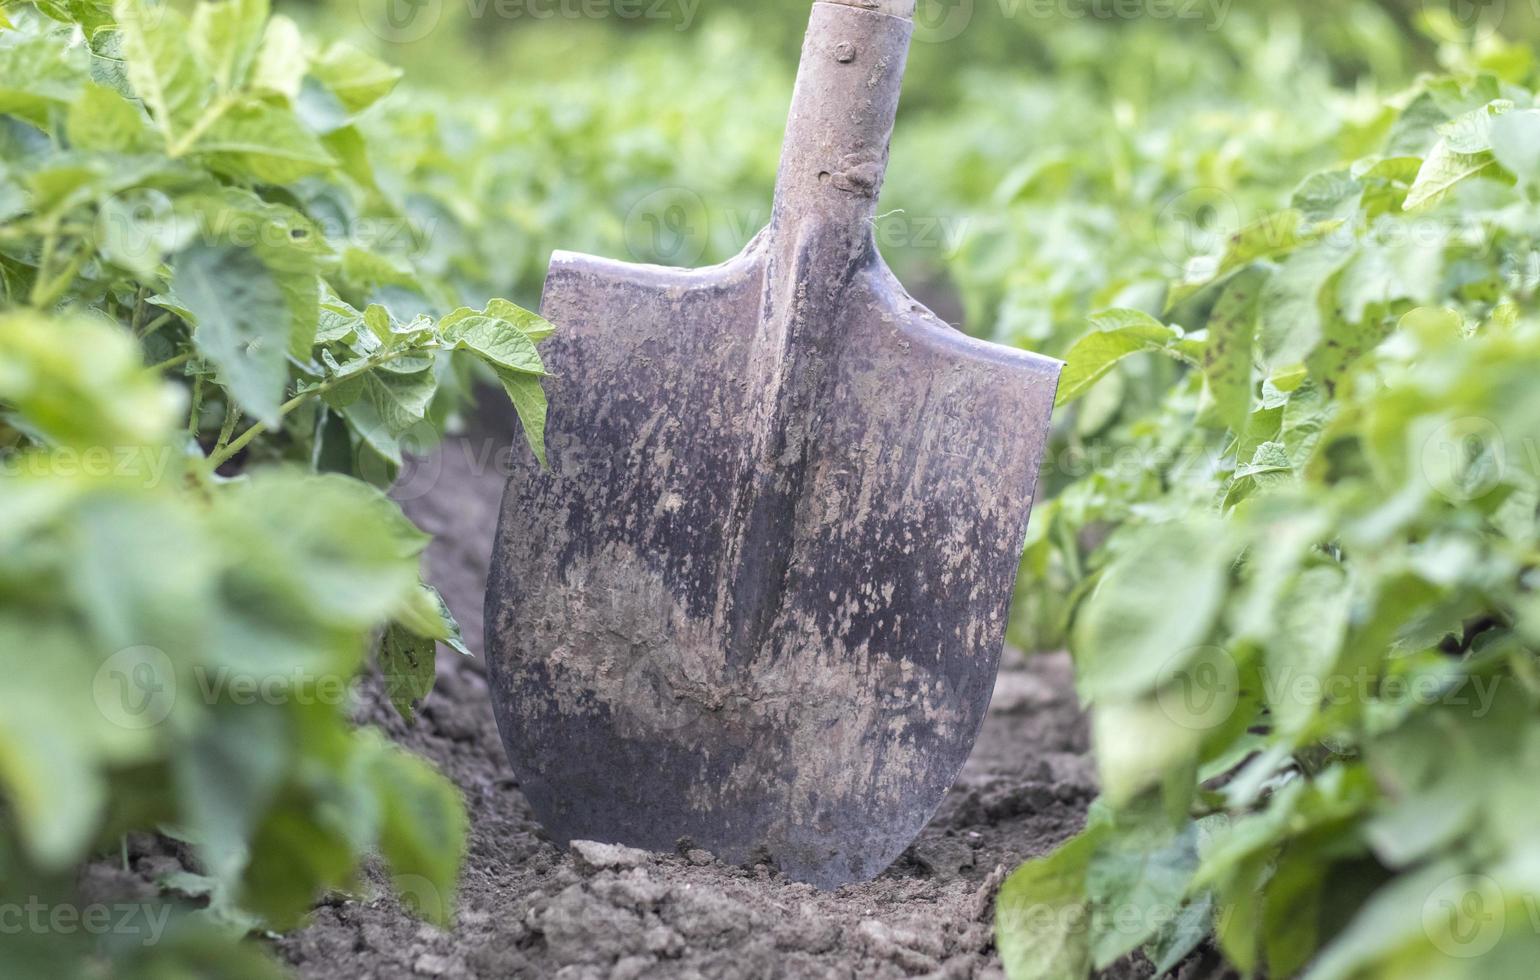 Shovel on the background of potato bushes. Digging up a young potato tuber from the ground on a farm. Digging potatoes with a shovel on a field of soil. Harvesting potatoes in autumn. photo